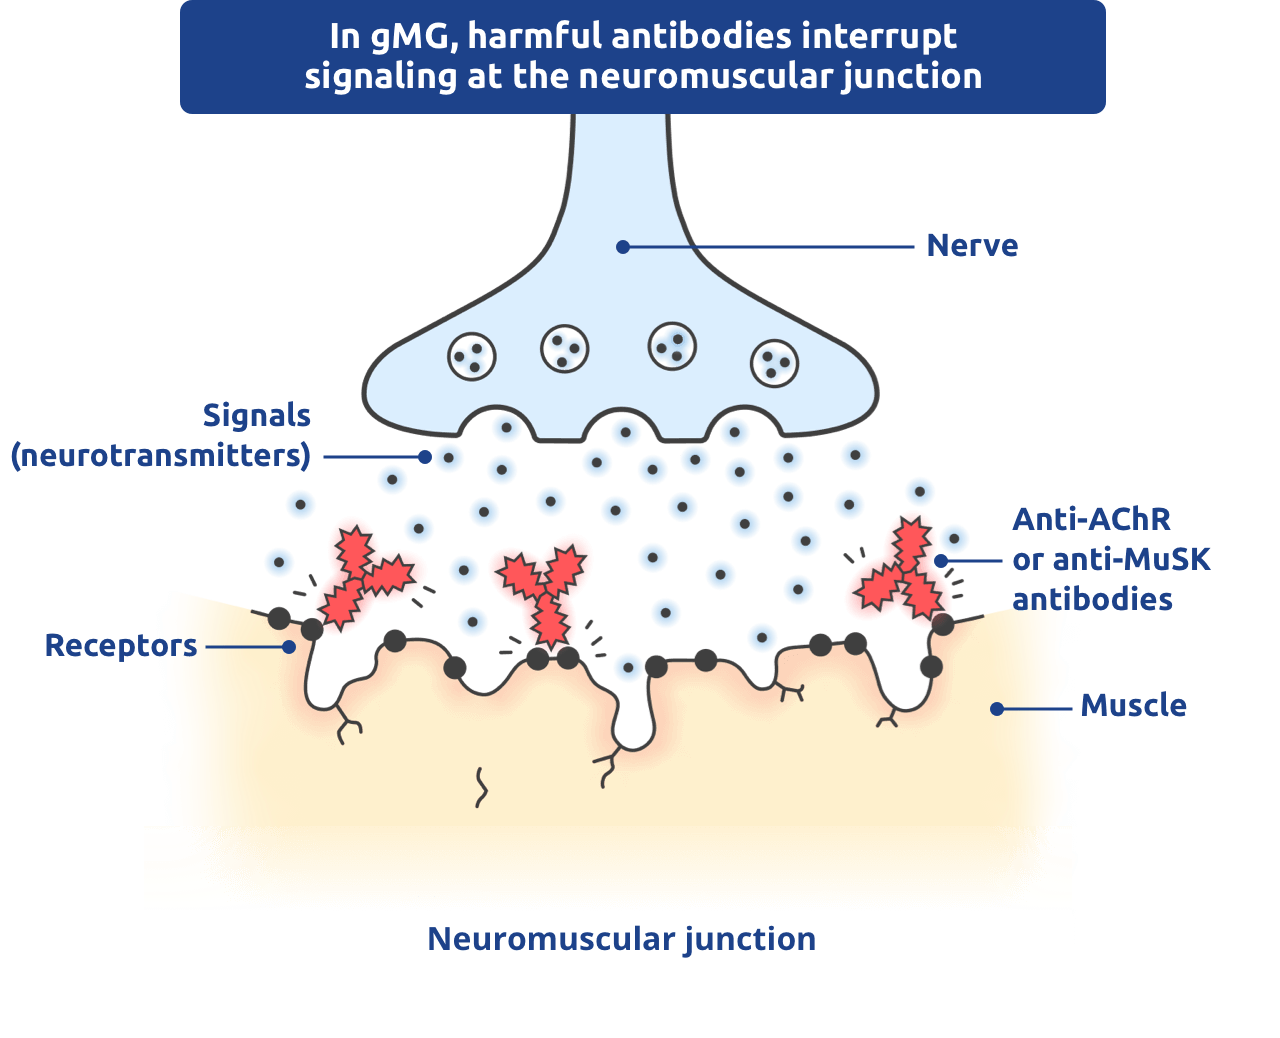 In gMG, harmful antibodies interrupt signaling at the neuromuscular junction.